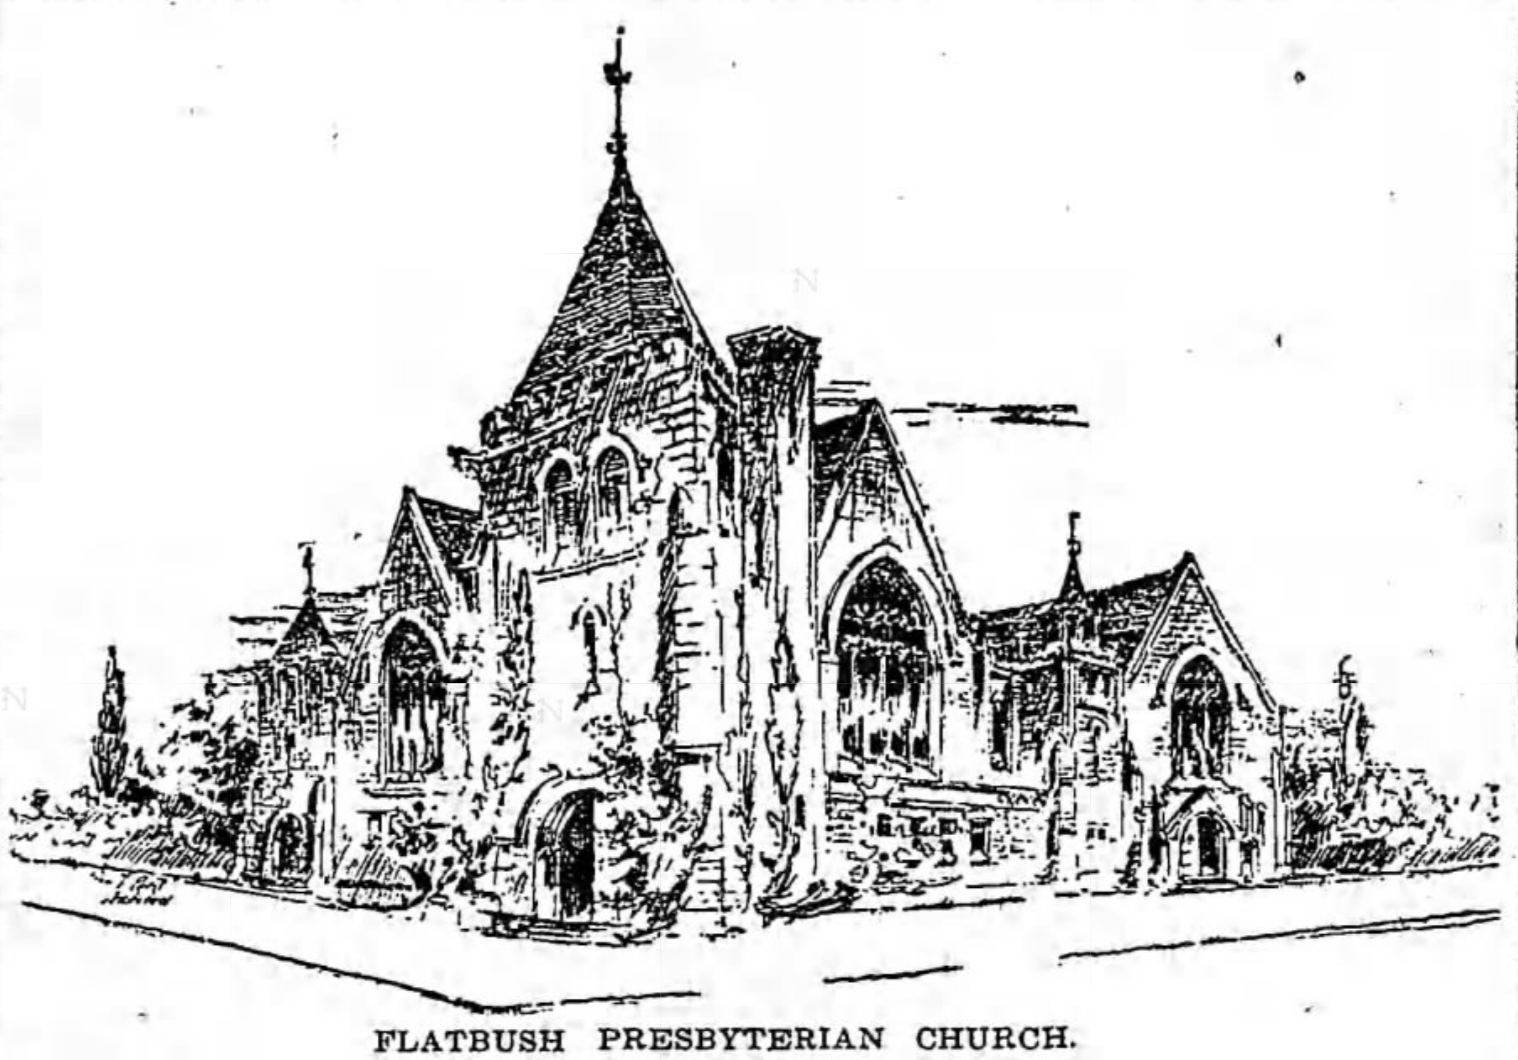 Another Church Looking For A Developer – Flatbush Presbyterian Church Is On The Market